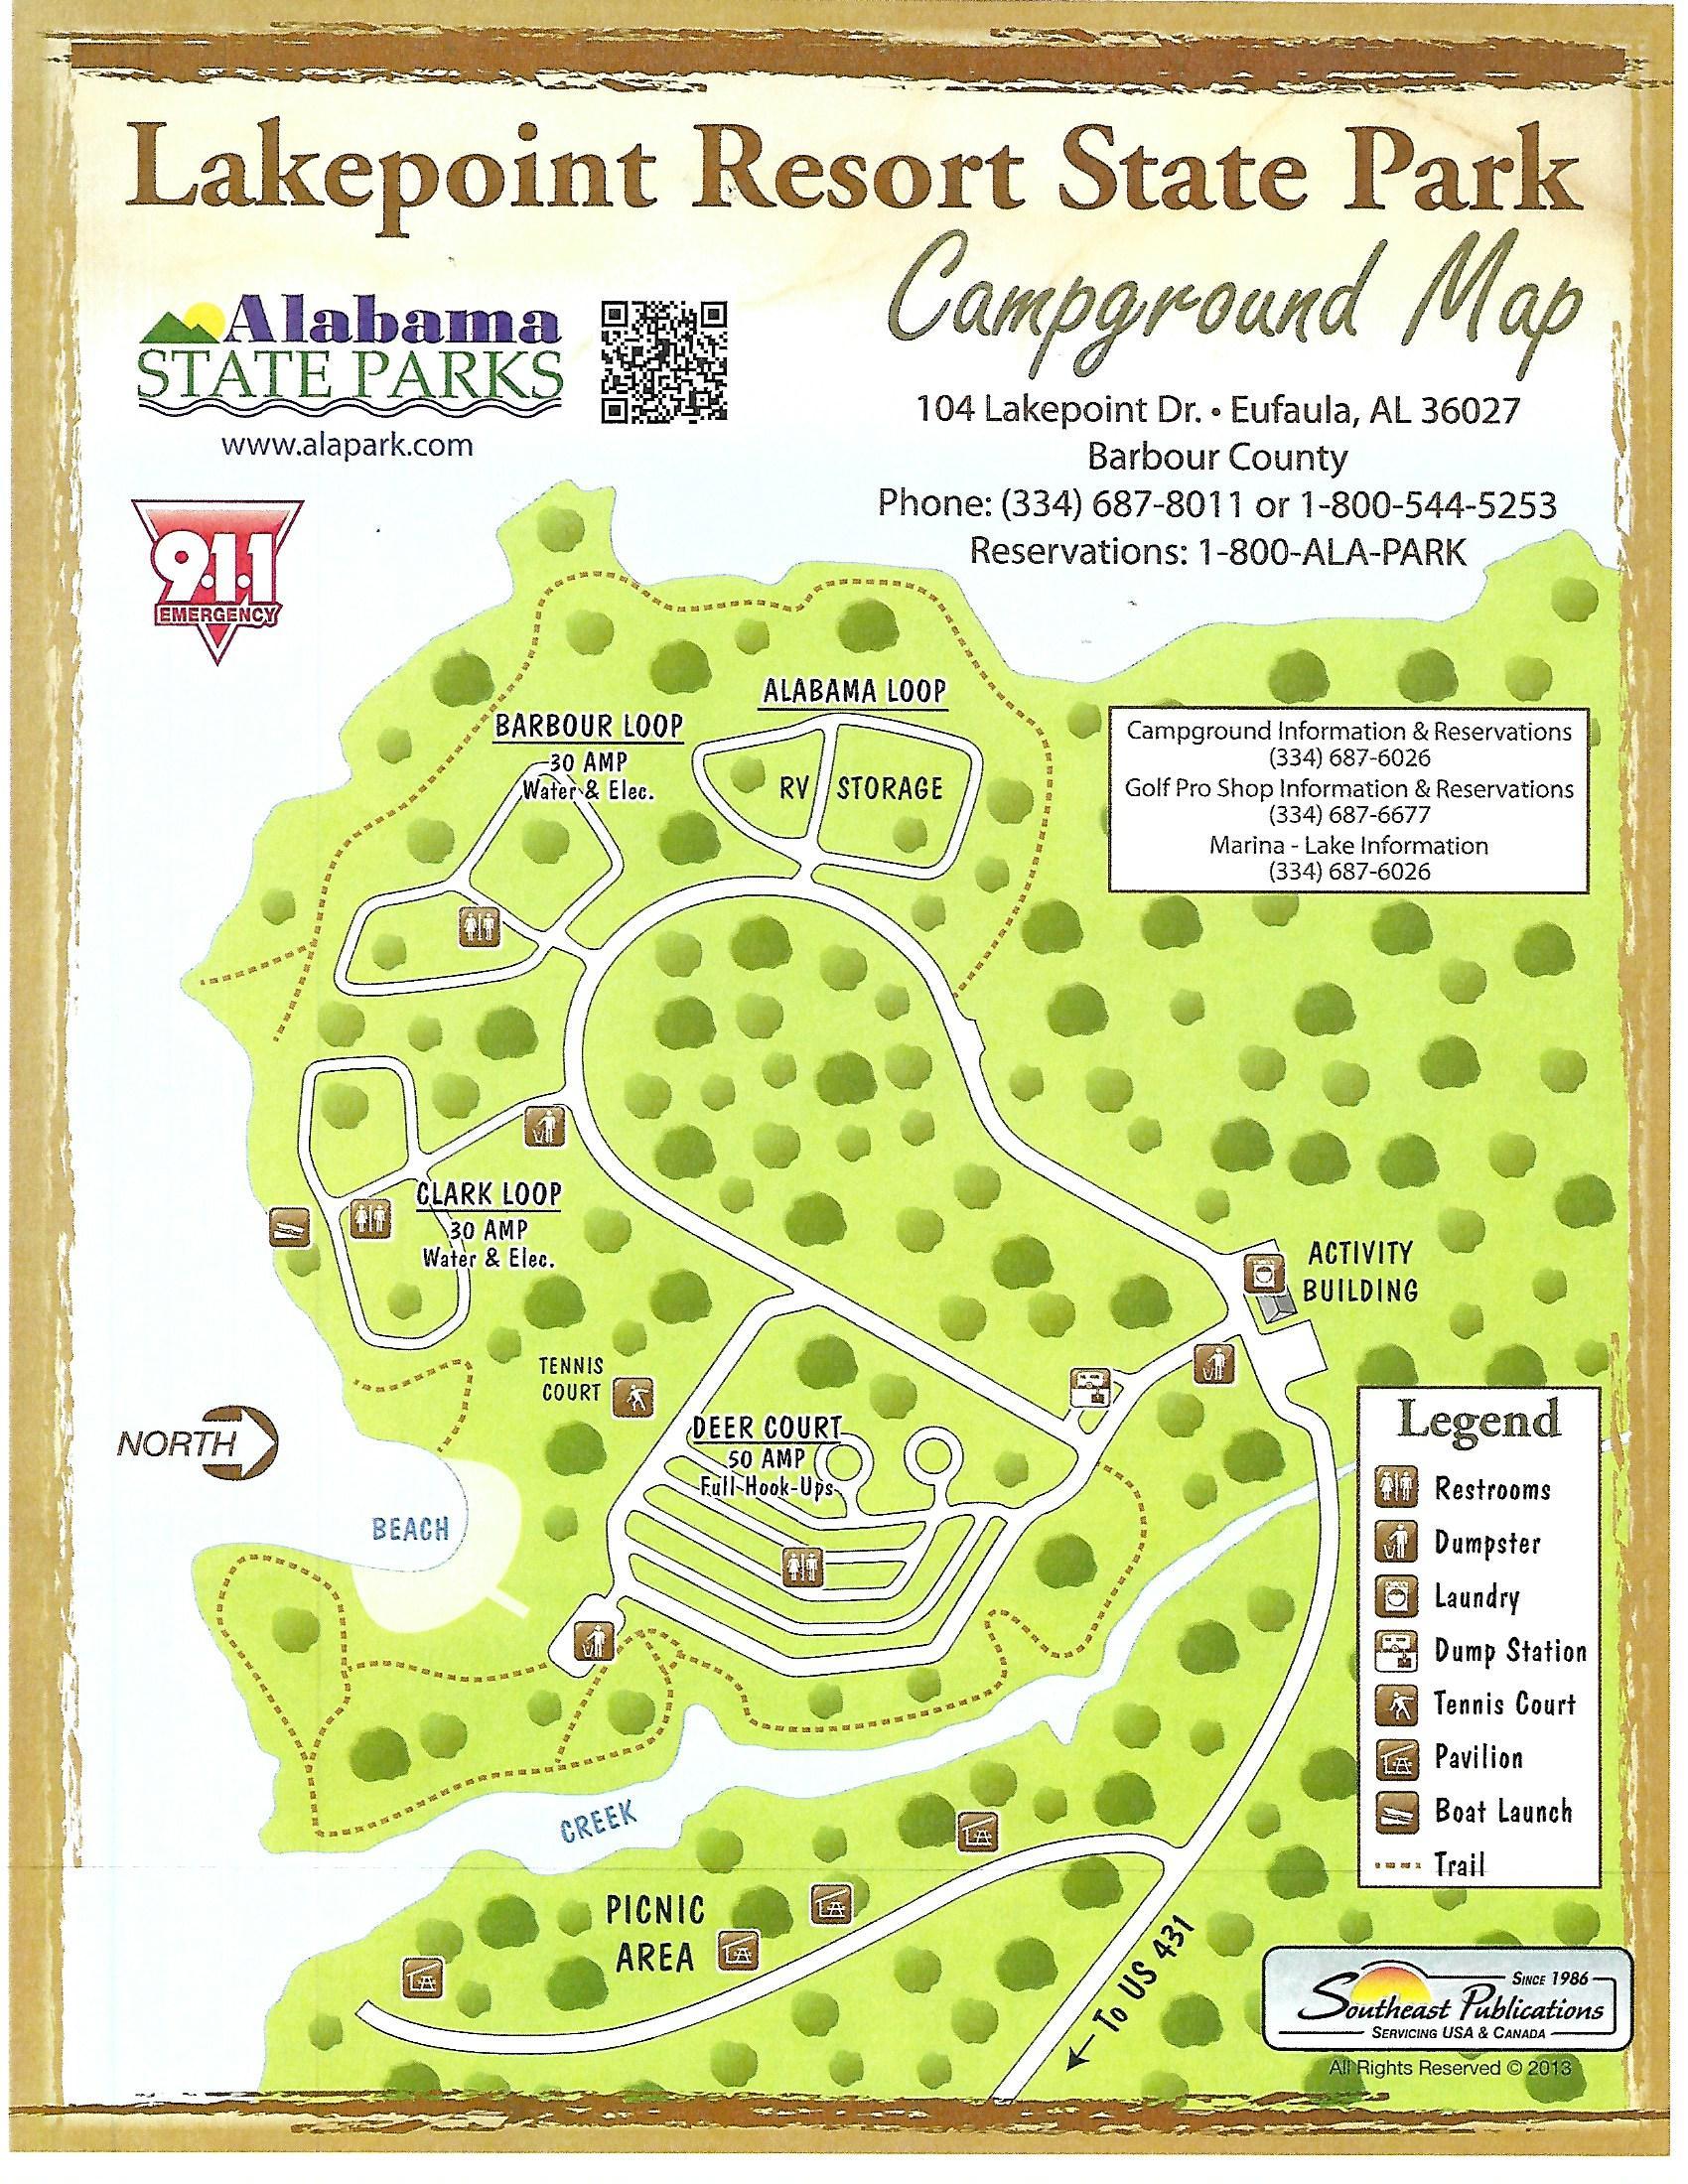 Lakepoint Campground Map